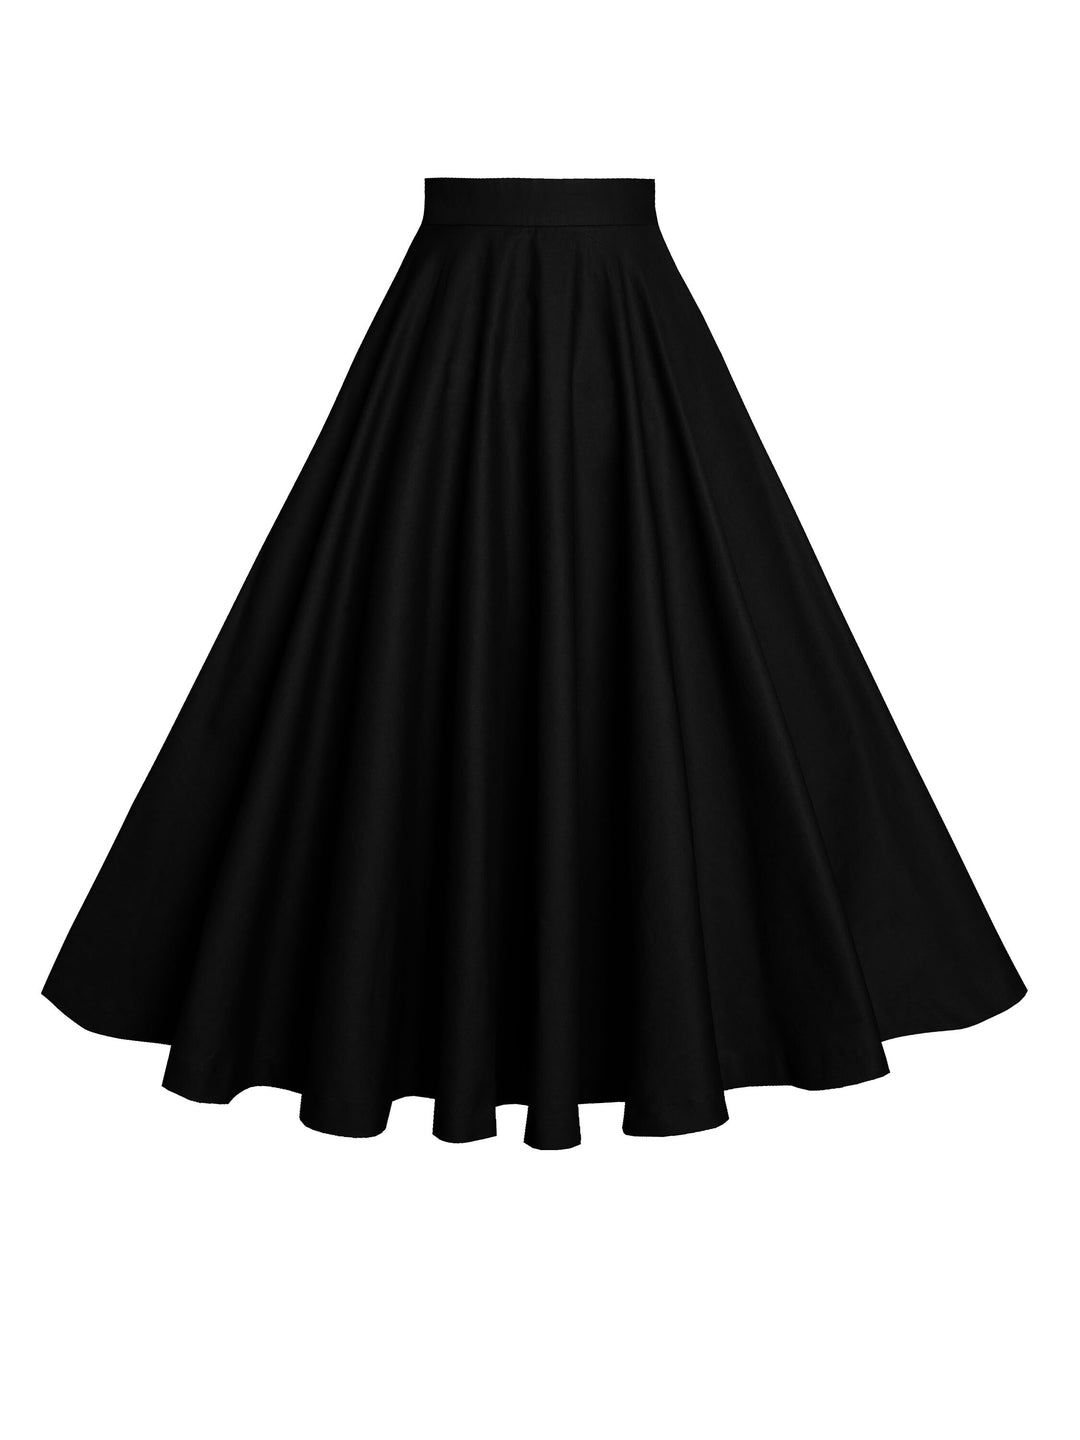 RTS - Size S - Lindy Skirt in Raven Black Cotton